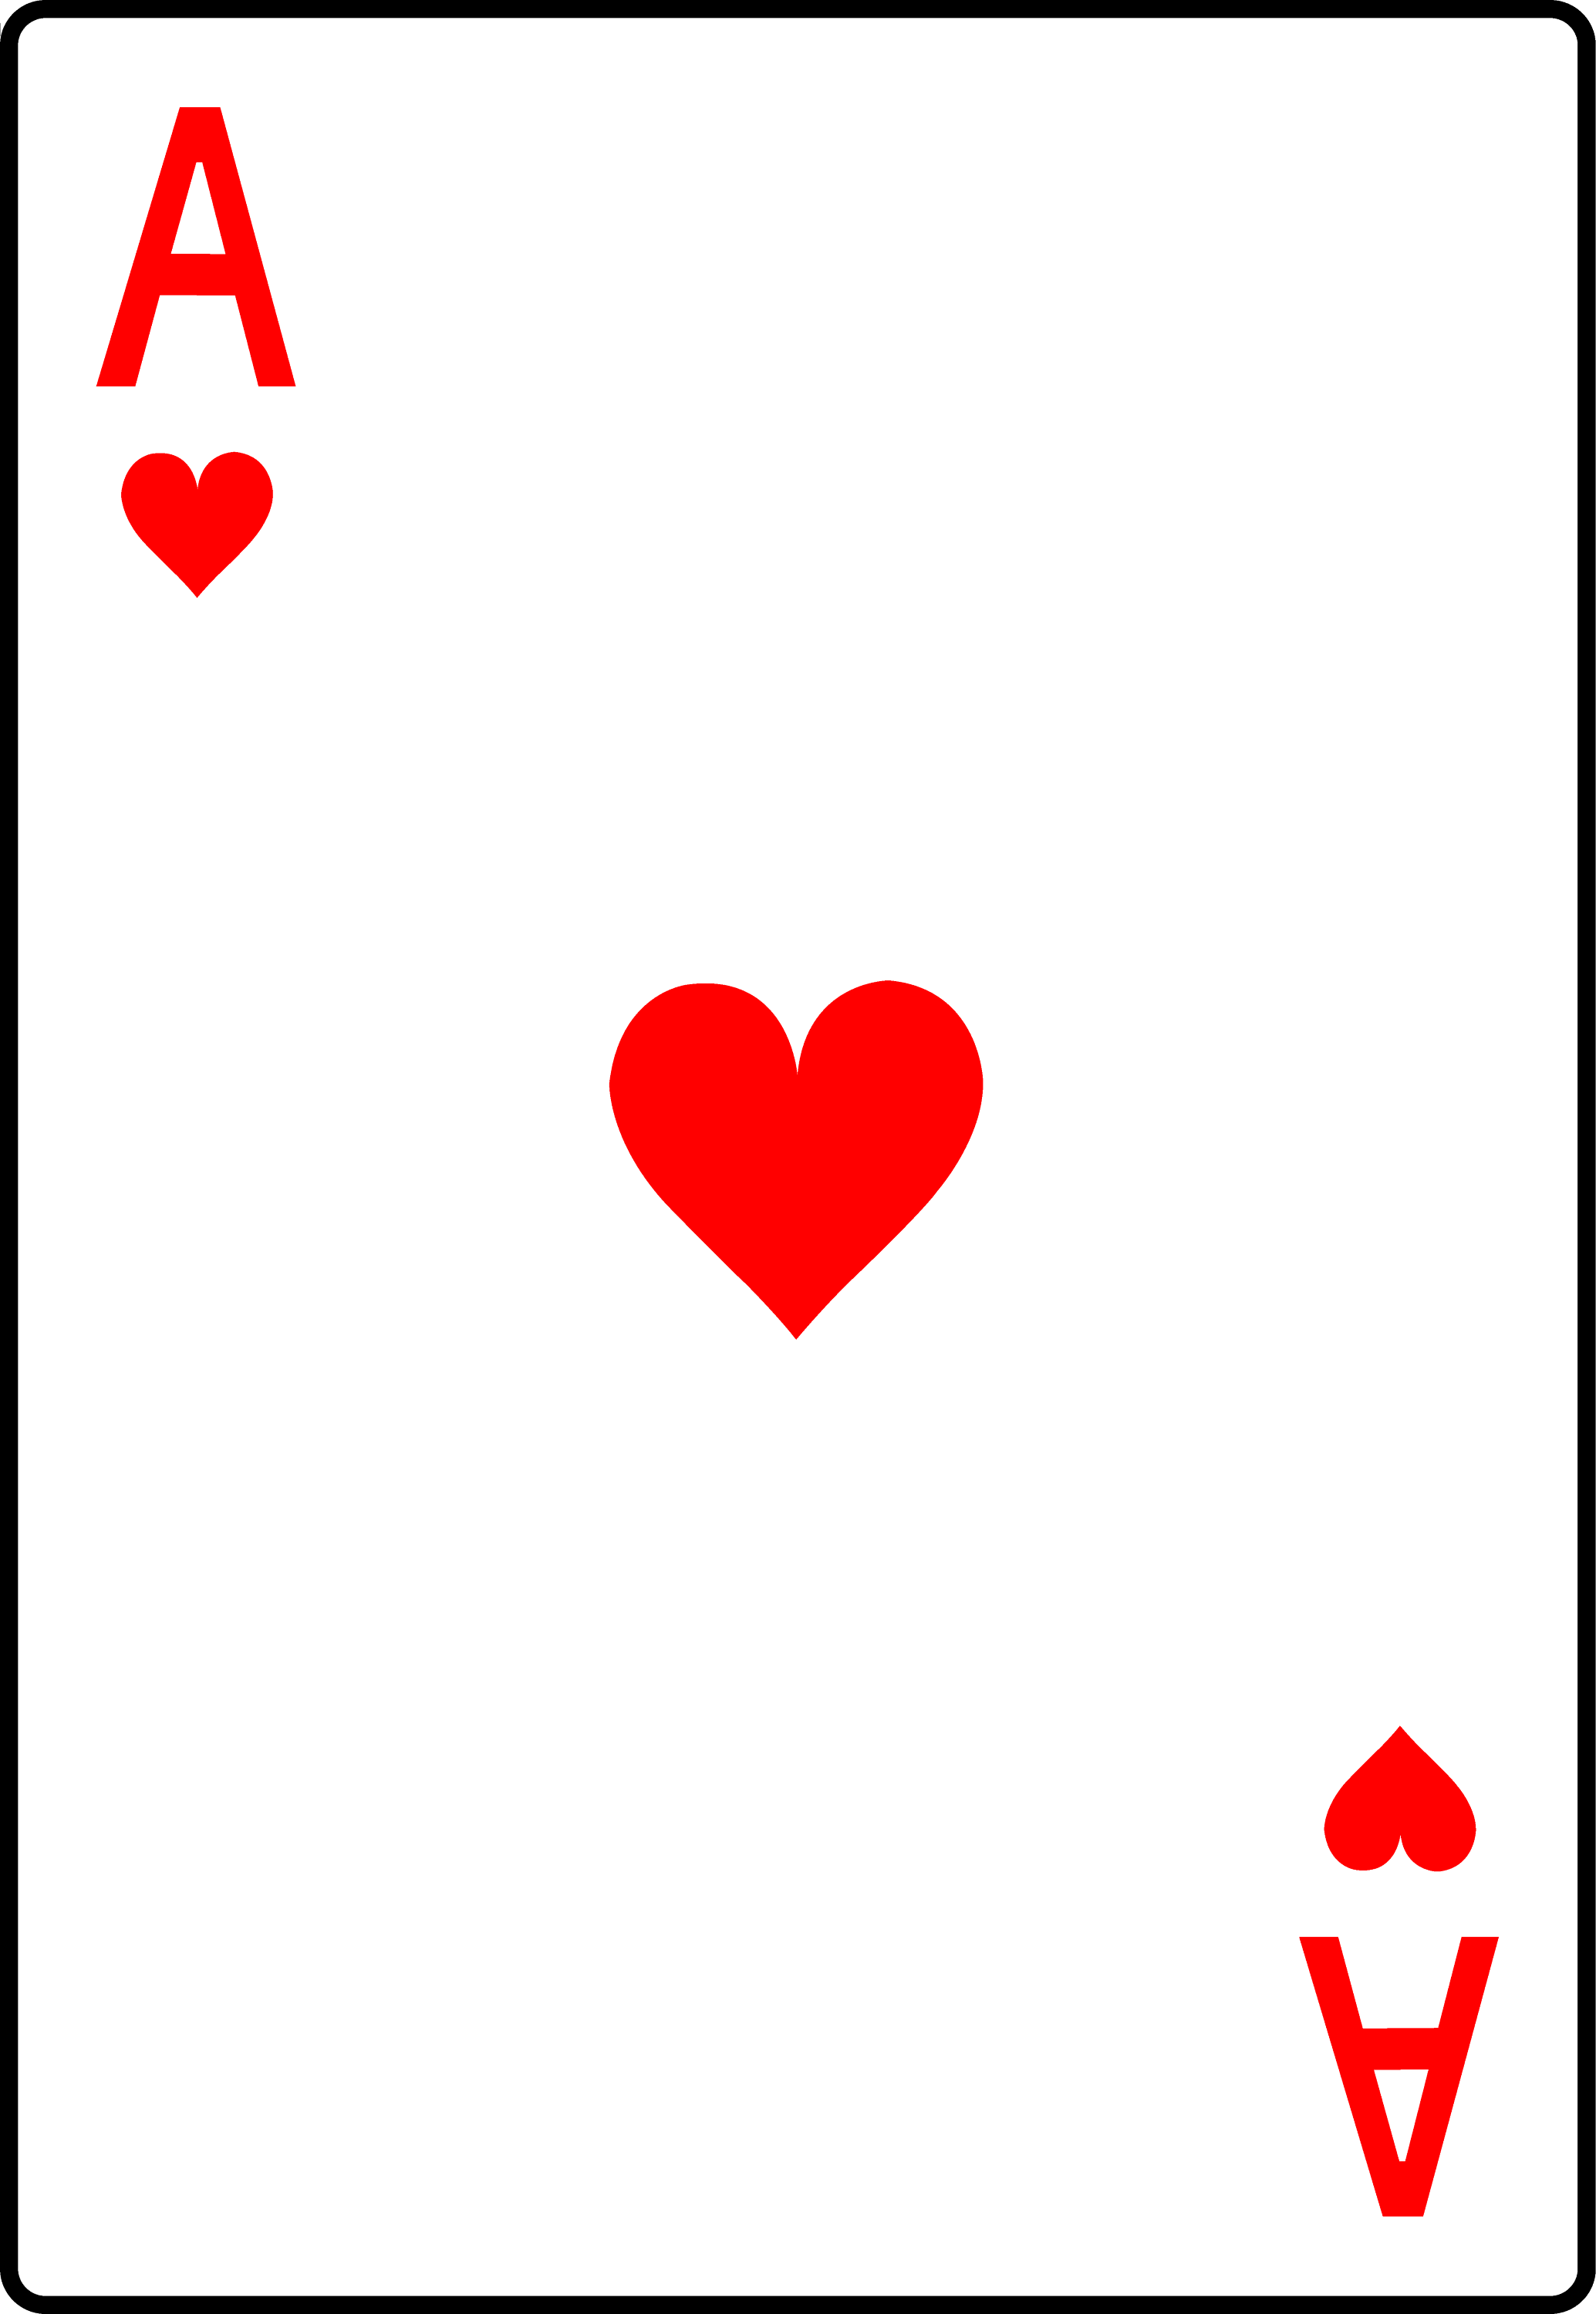 free clipart images playing cards - photo #37